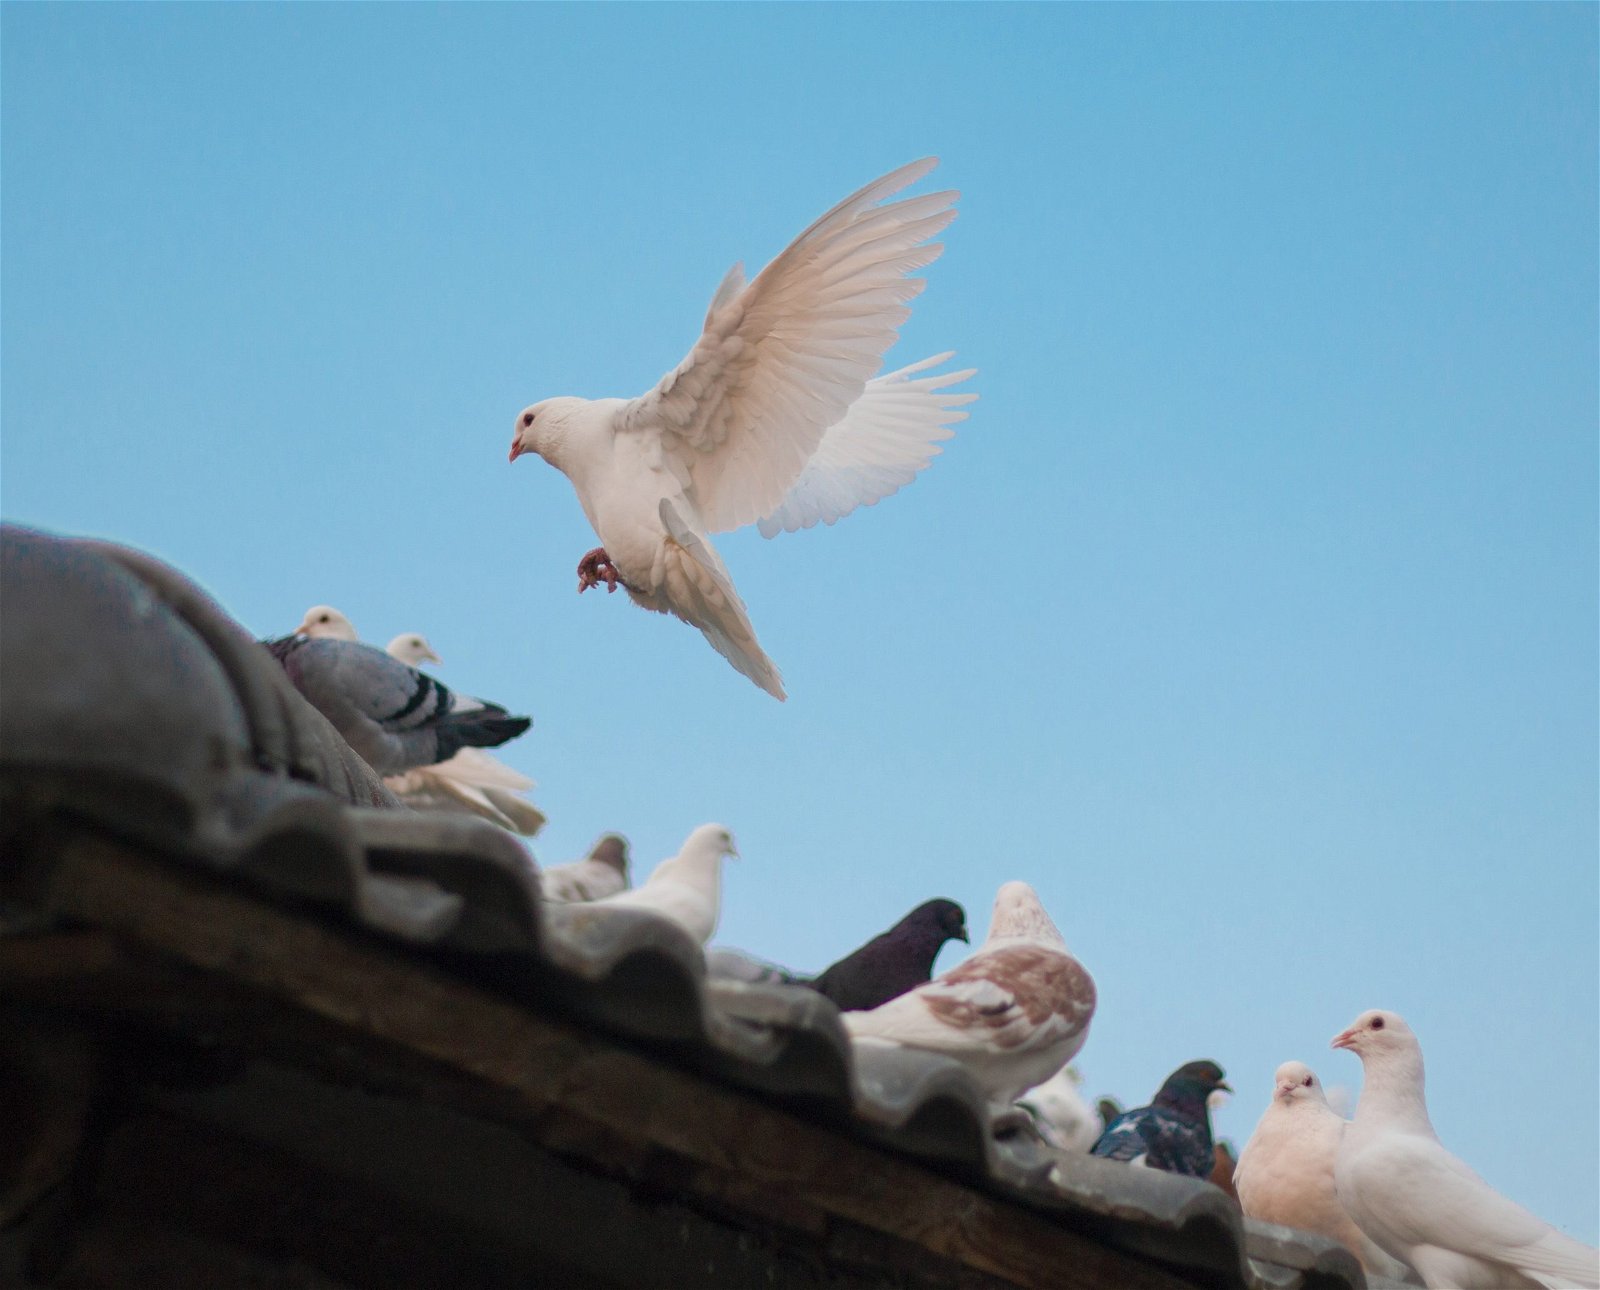 A dove landing on a roof